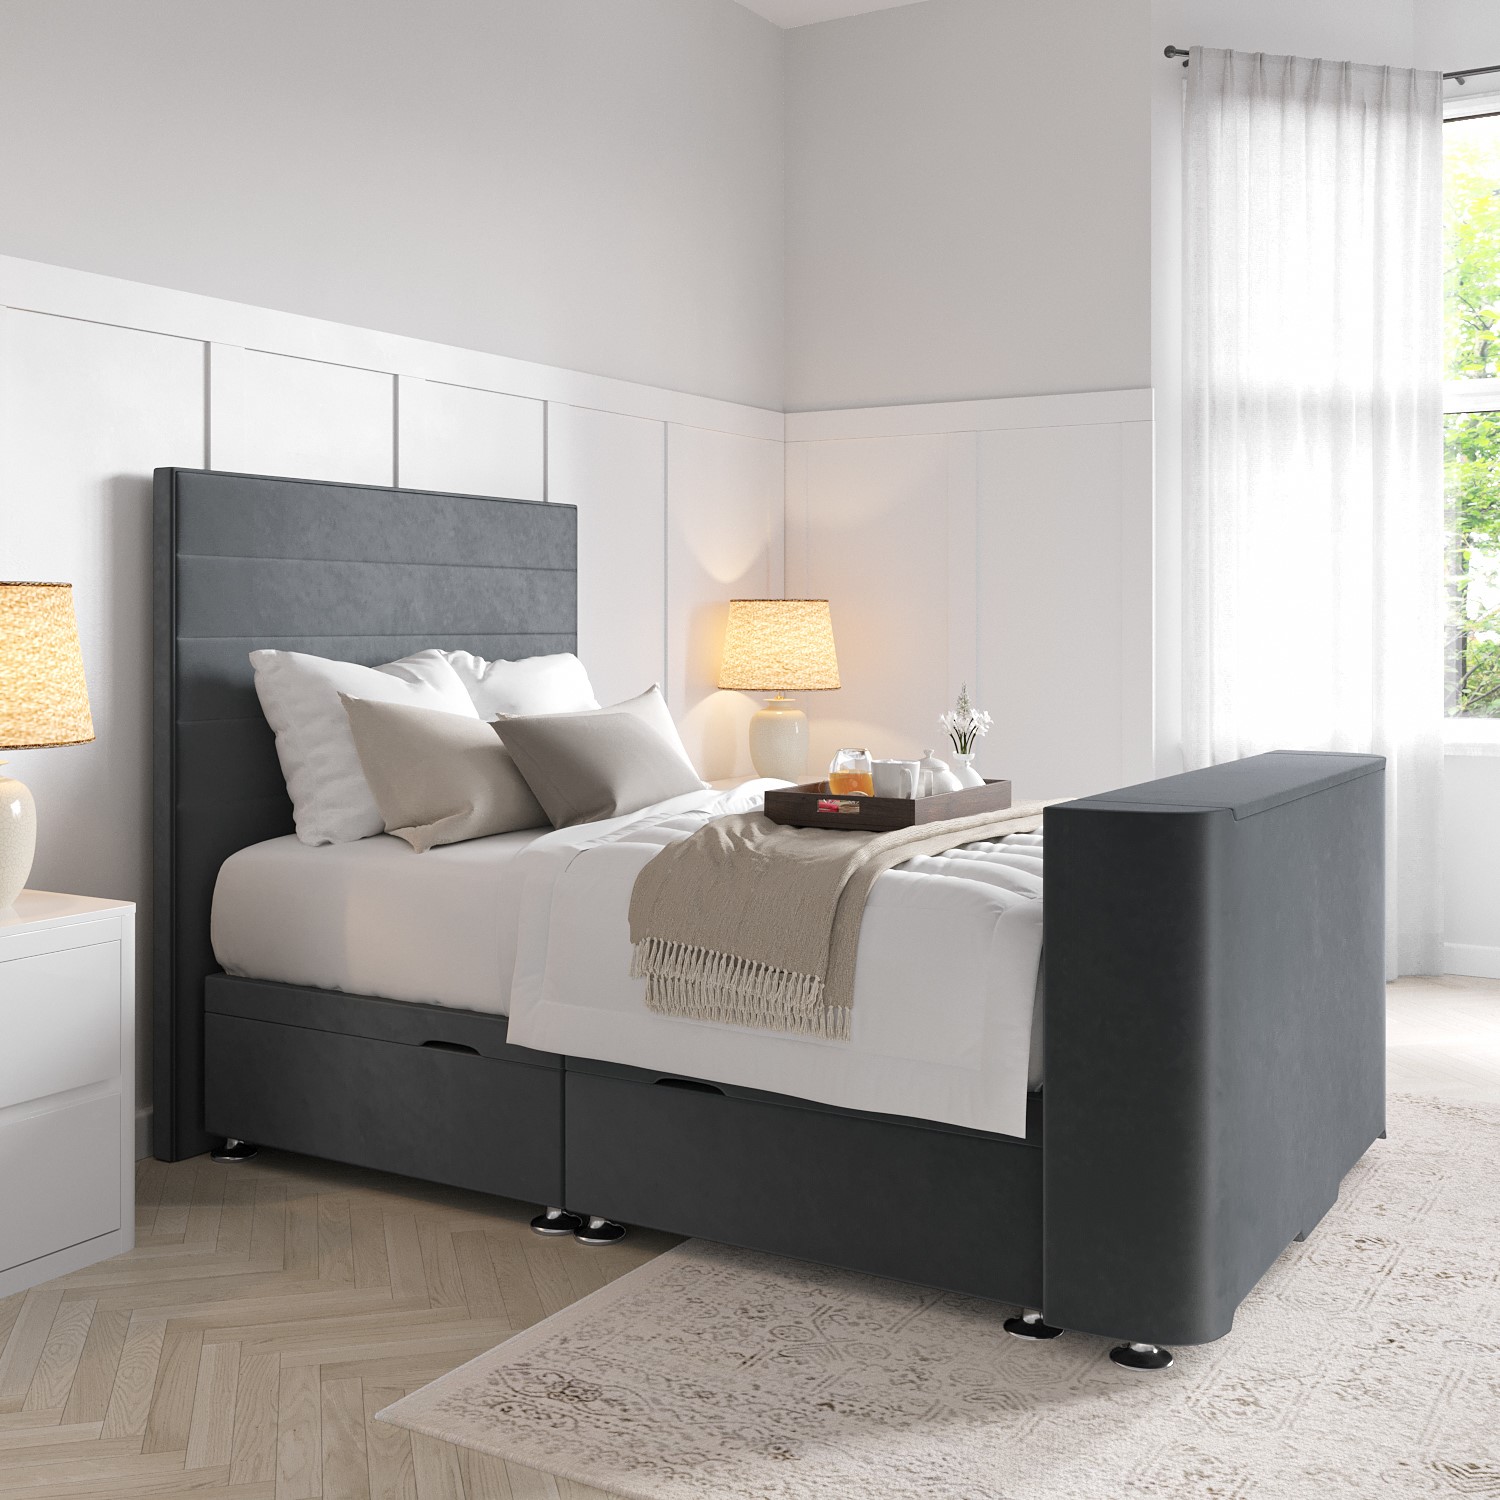 Read more about Double tv ottoman bed in grey velvet with stripe headboard eden